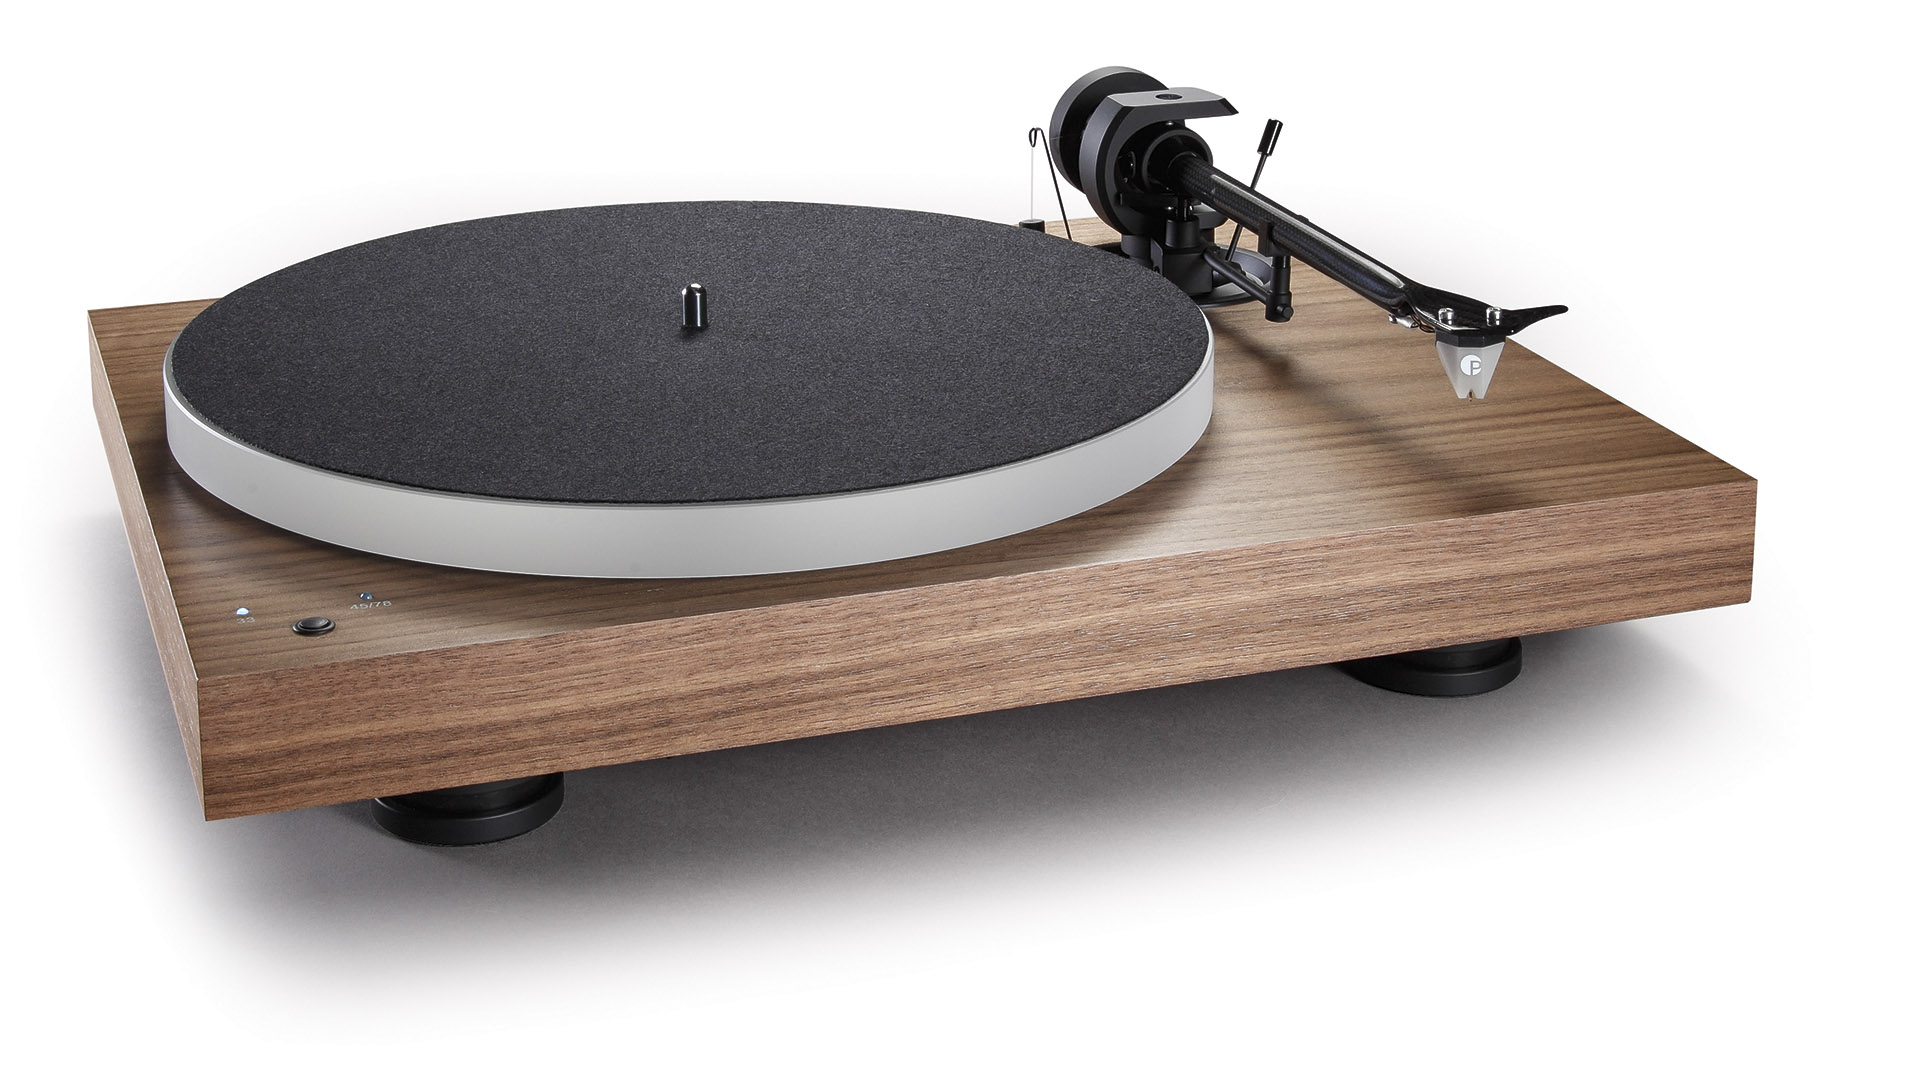 Solid Turntable With The Best Price To Fidelity Ratio